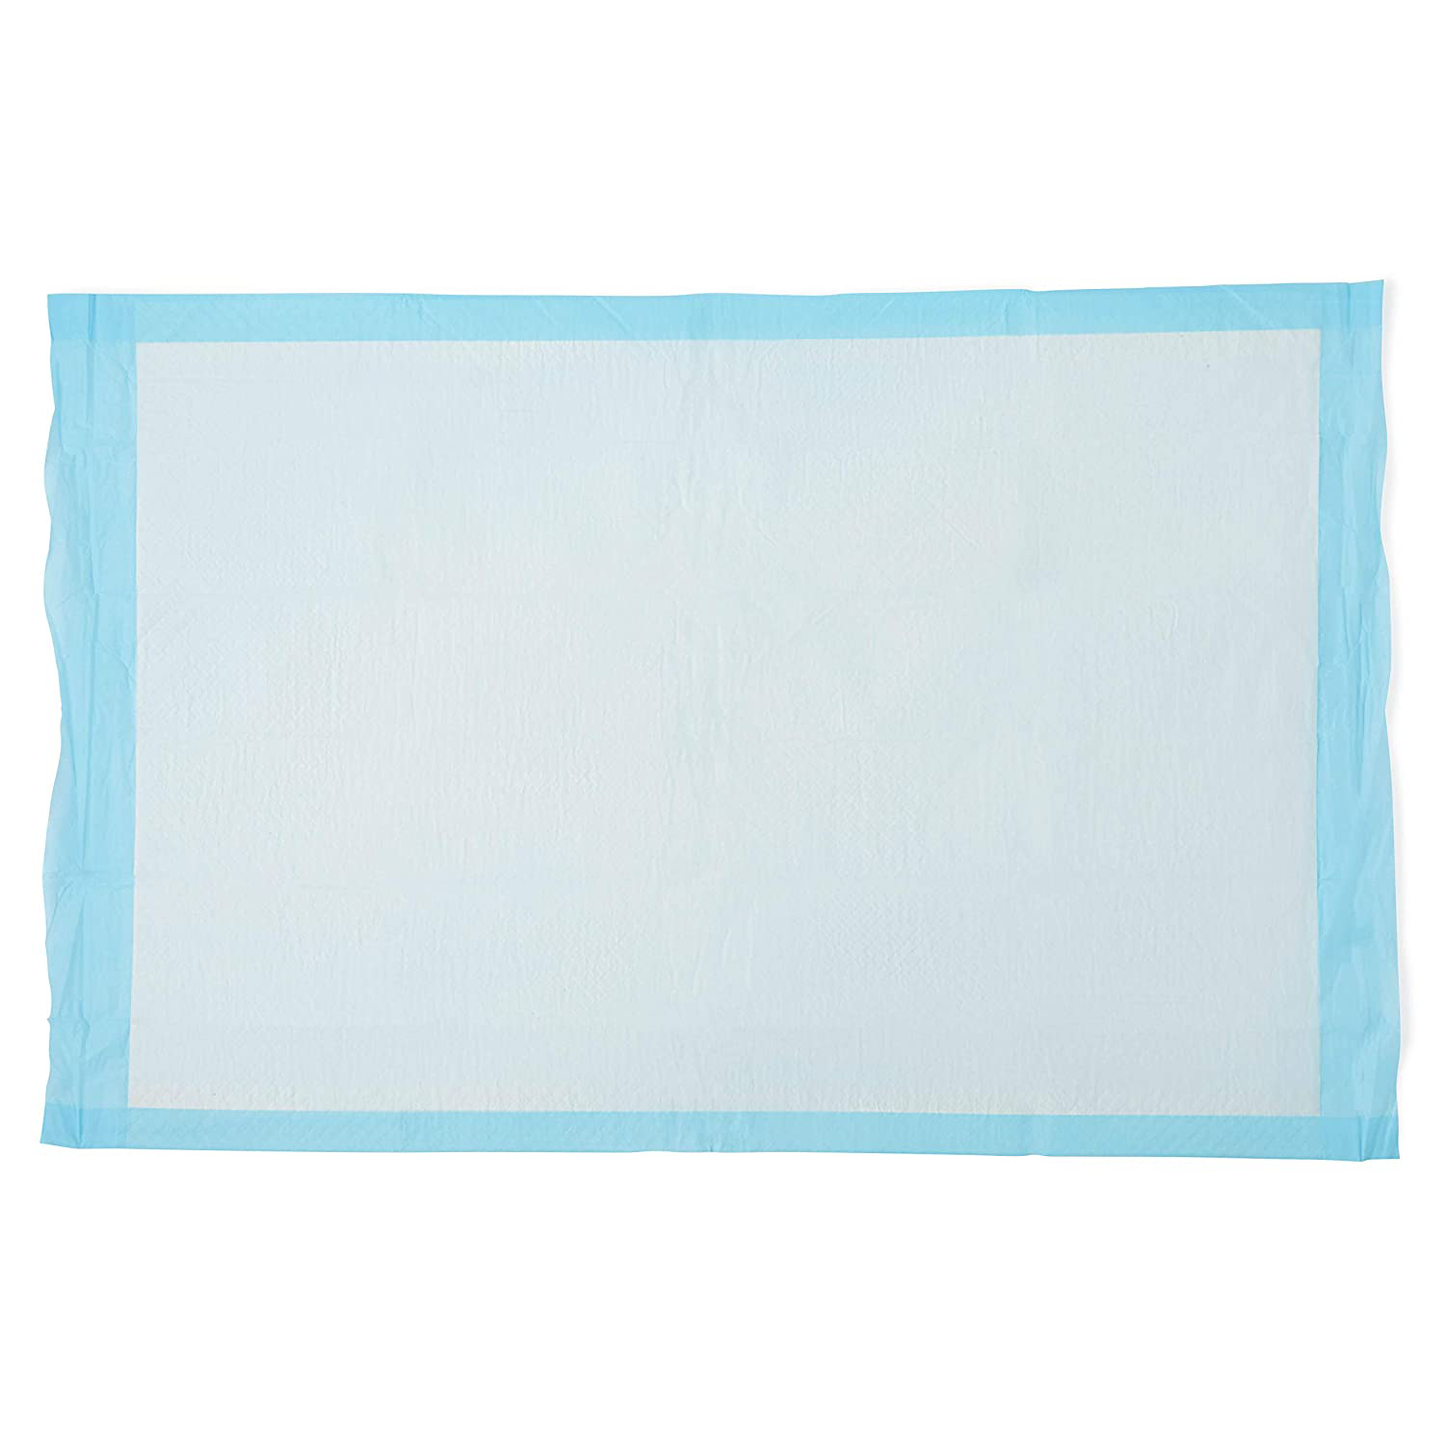 Medline-Msc281229C Quilted Basic Disposable Blue Underpad, 23" X 36" for Incontinence, Furniture Protection or Pet Pads (Pack of 150) Animals & Pet Supplies > Pet Supplies > Dog Supplies > Dog Diaper Pads & Liners Medline   